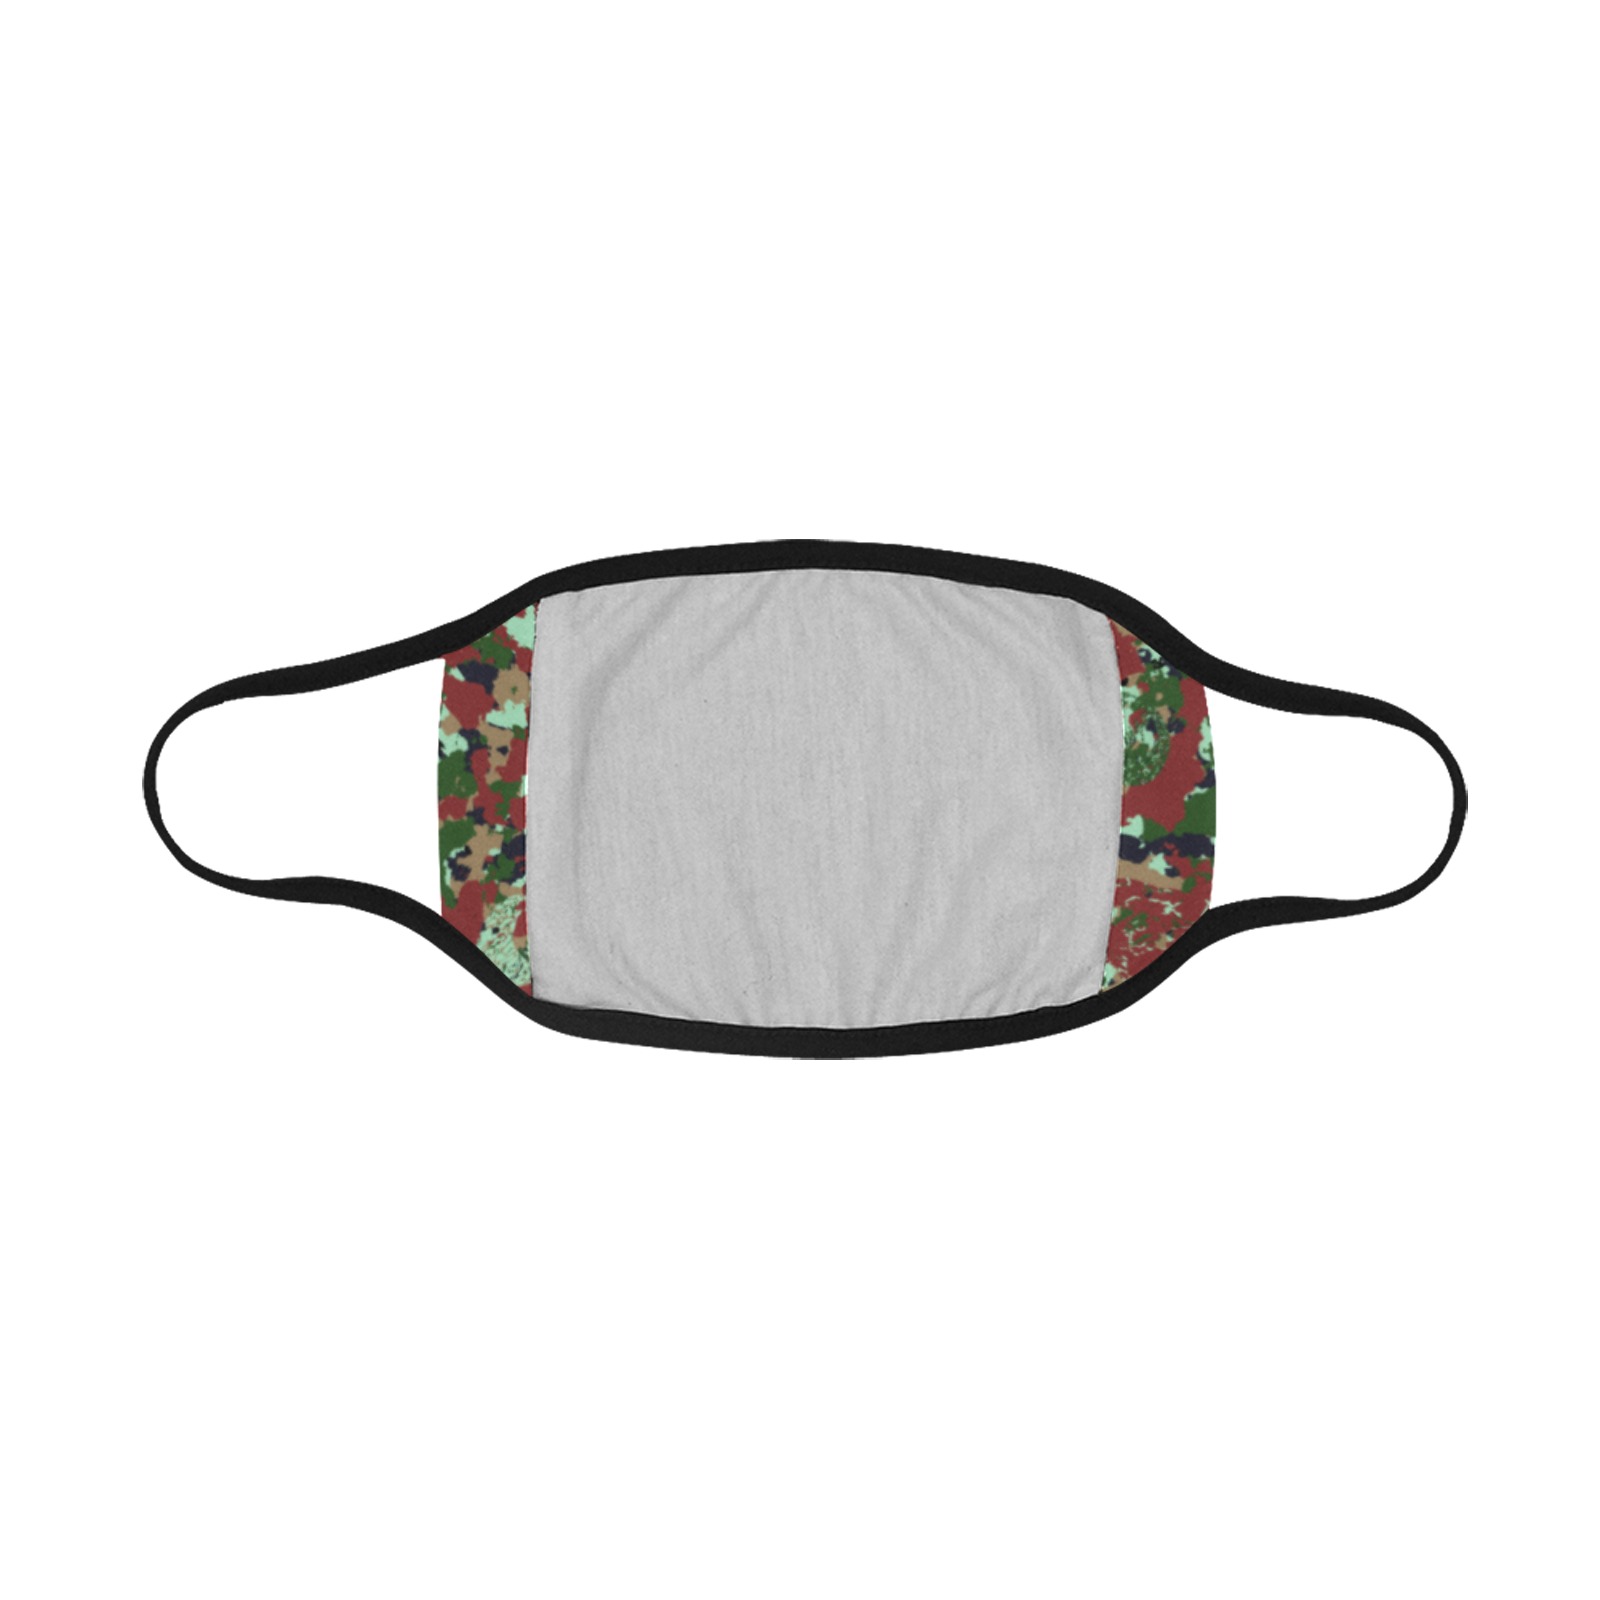 owsenflage2 Mouth Mask (30 Filters Included) (Non-medical Products)